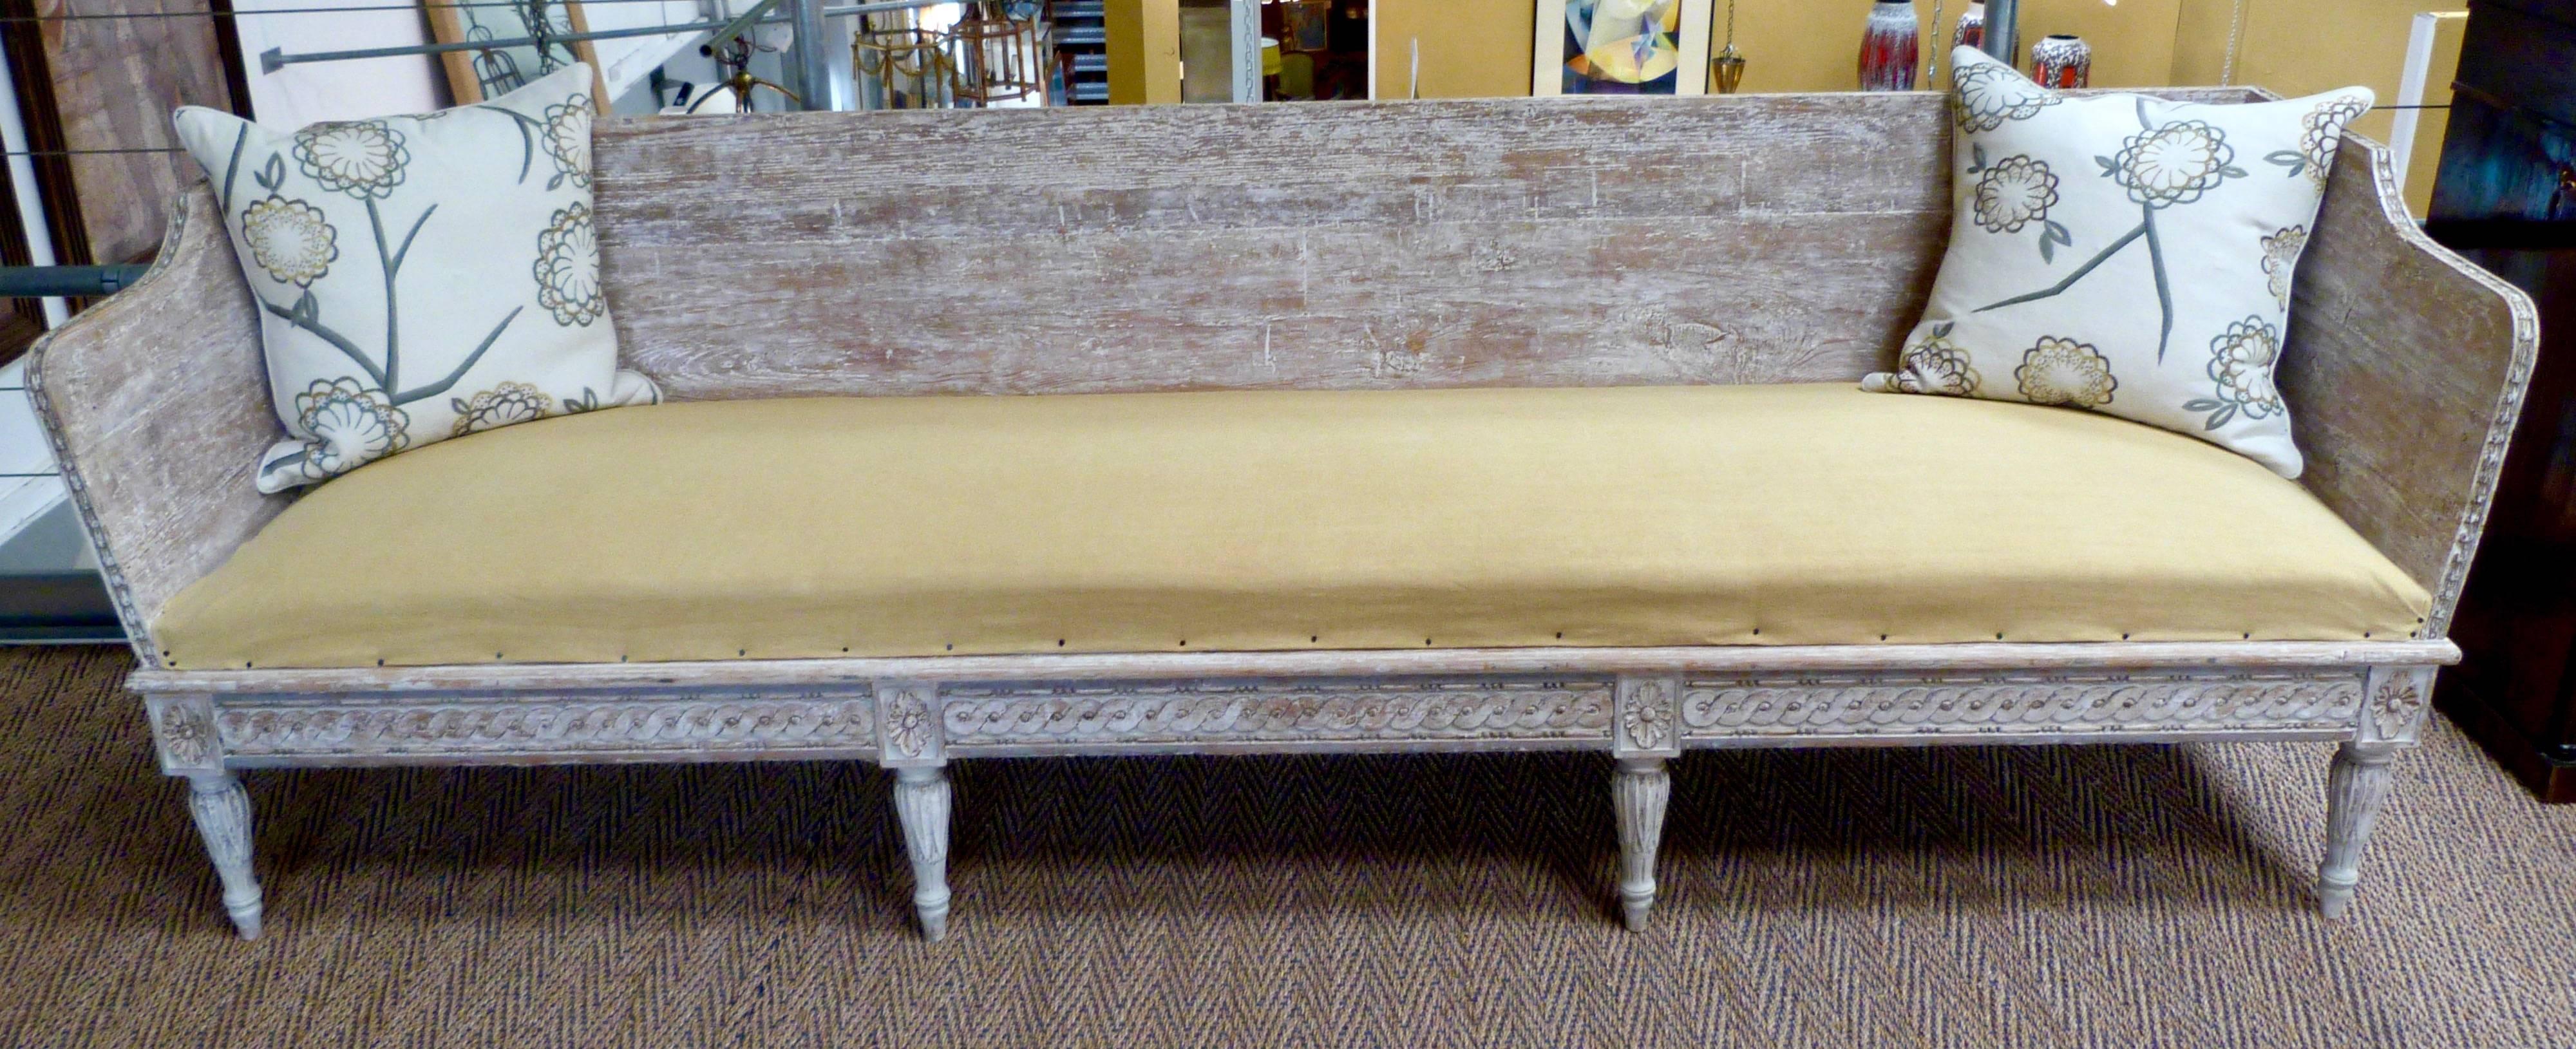 A late 18th century Swedish bench with scraped back paint.